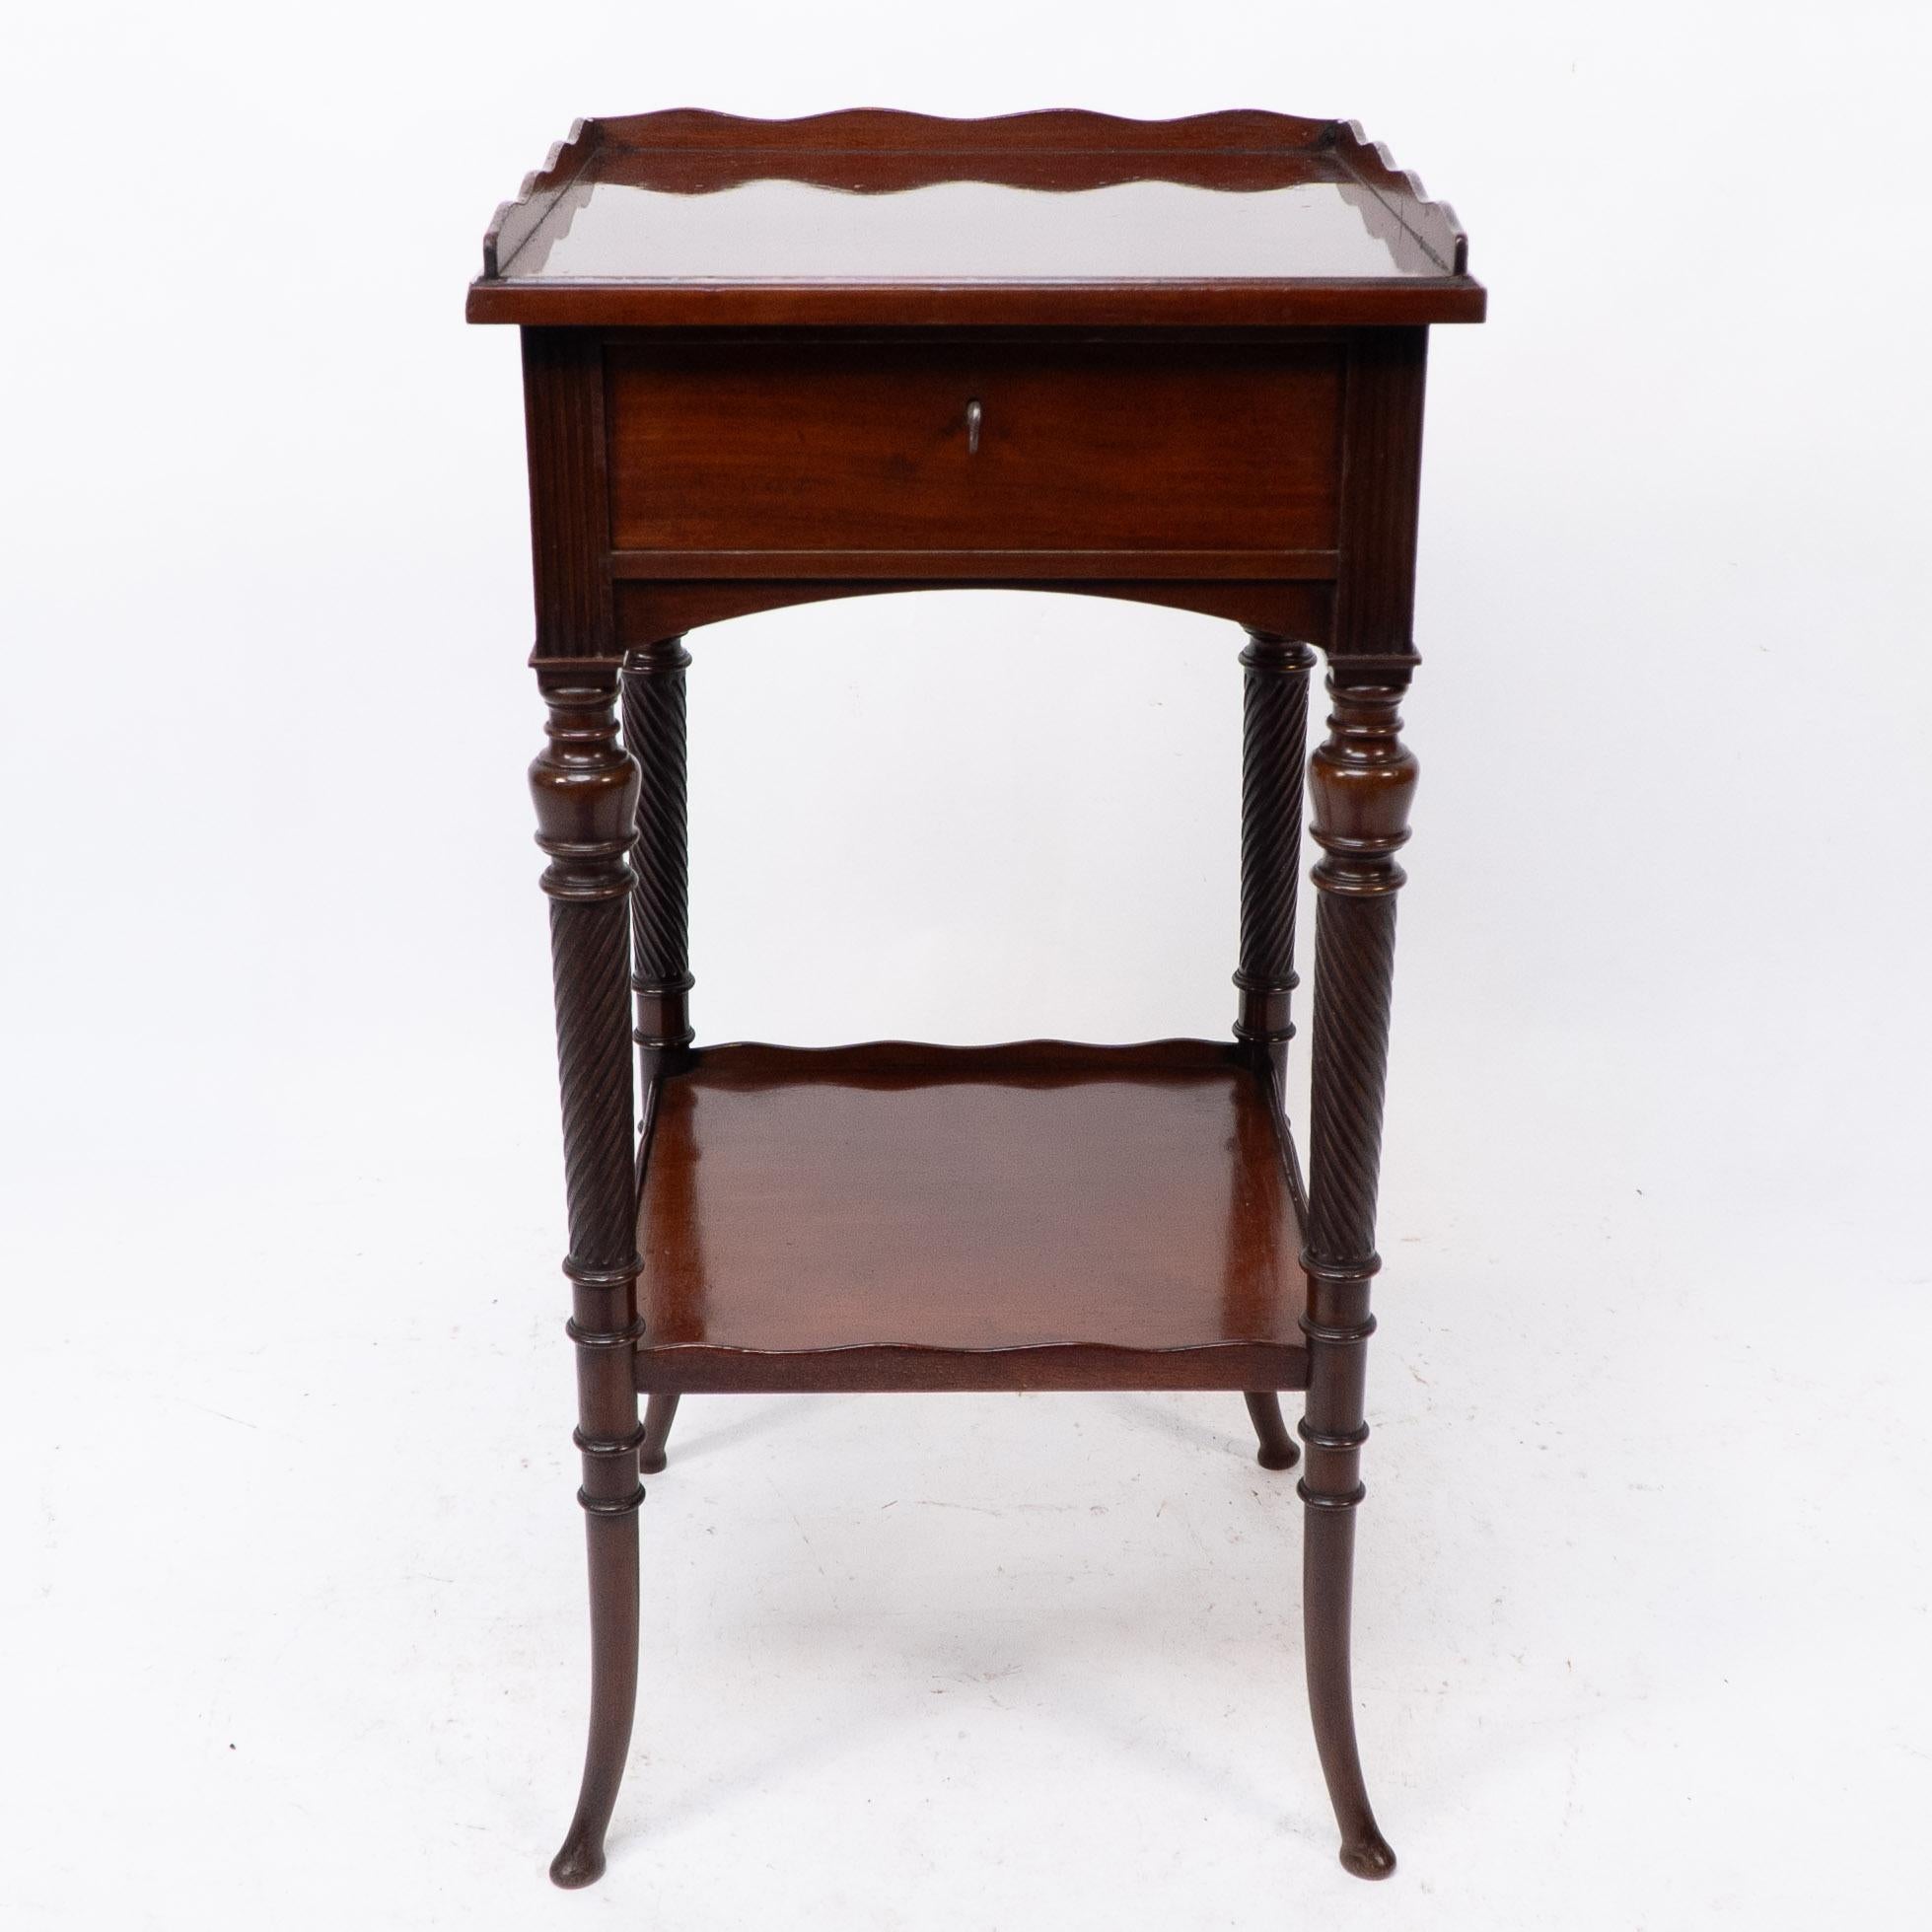 E W Godwin, attributed, made by Collinson & Lock. An Aesthetic movement mahogany side table with spiral-turned legs on out swept feet.
With the original lock and key to the drawer.
Collinson and Lock of London 'Art Furnishers', founded with the